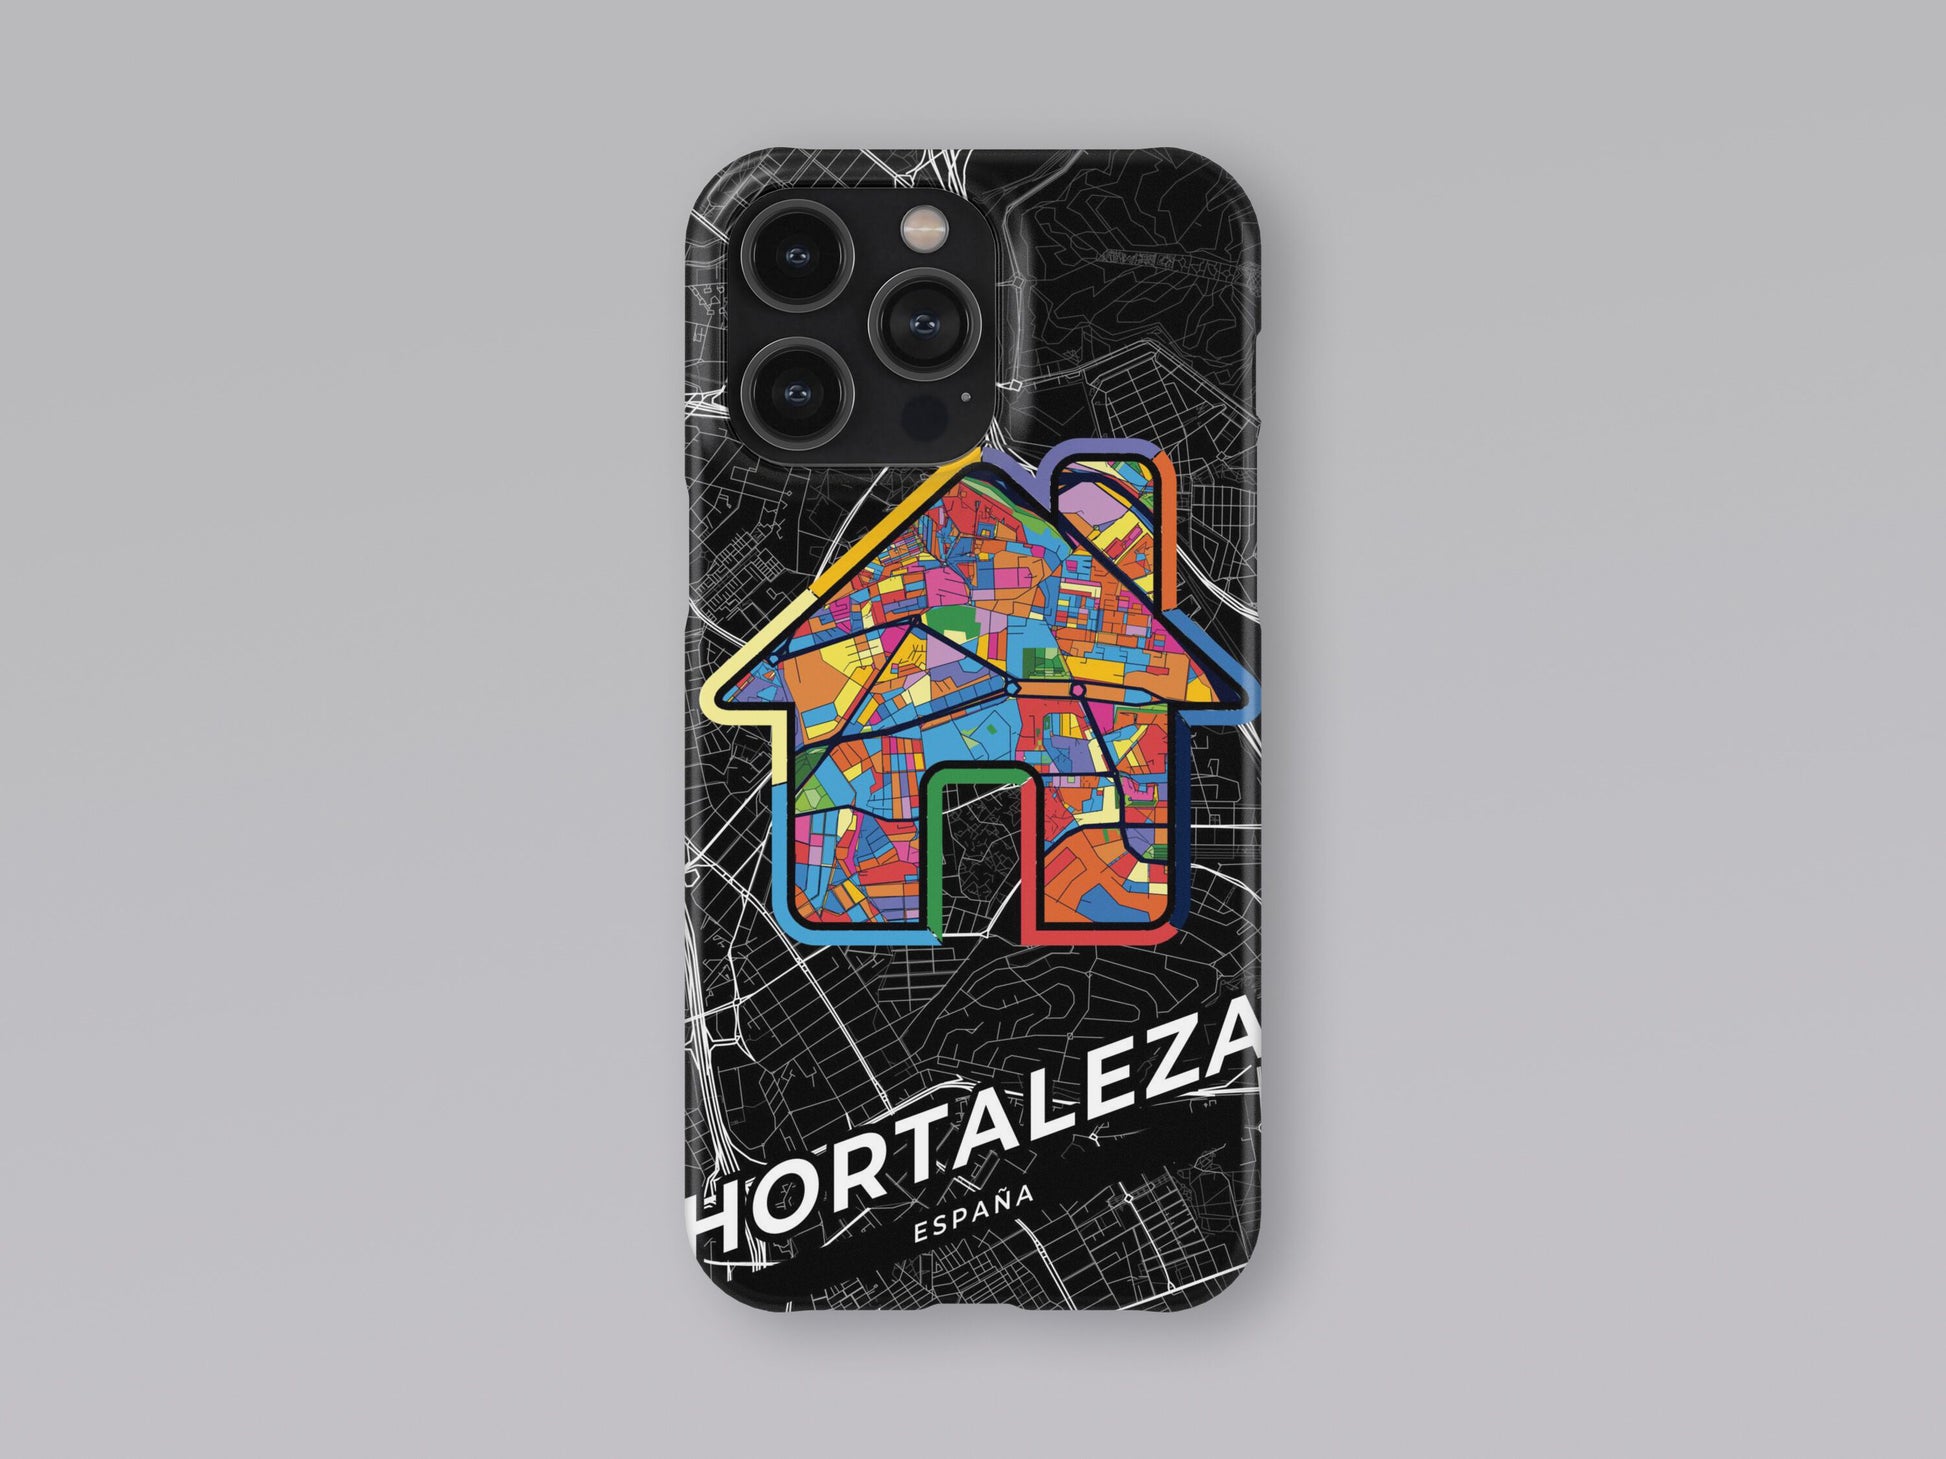 Hortaleza Spain slim phone case with colorful icon. Birthday, wedding or housewarming gift. Couple match cases. 3